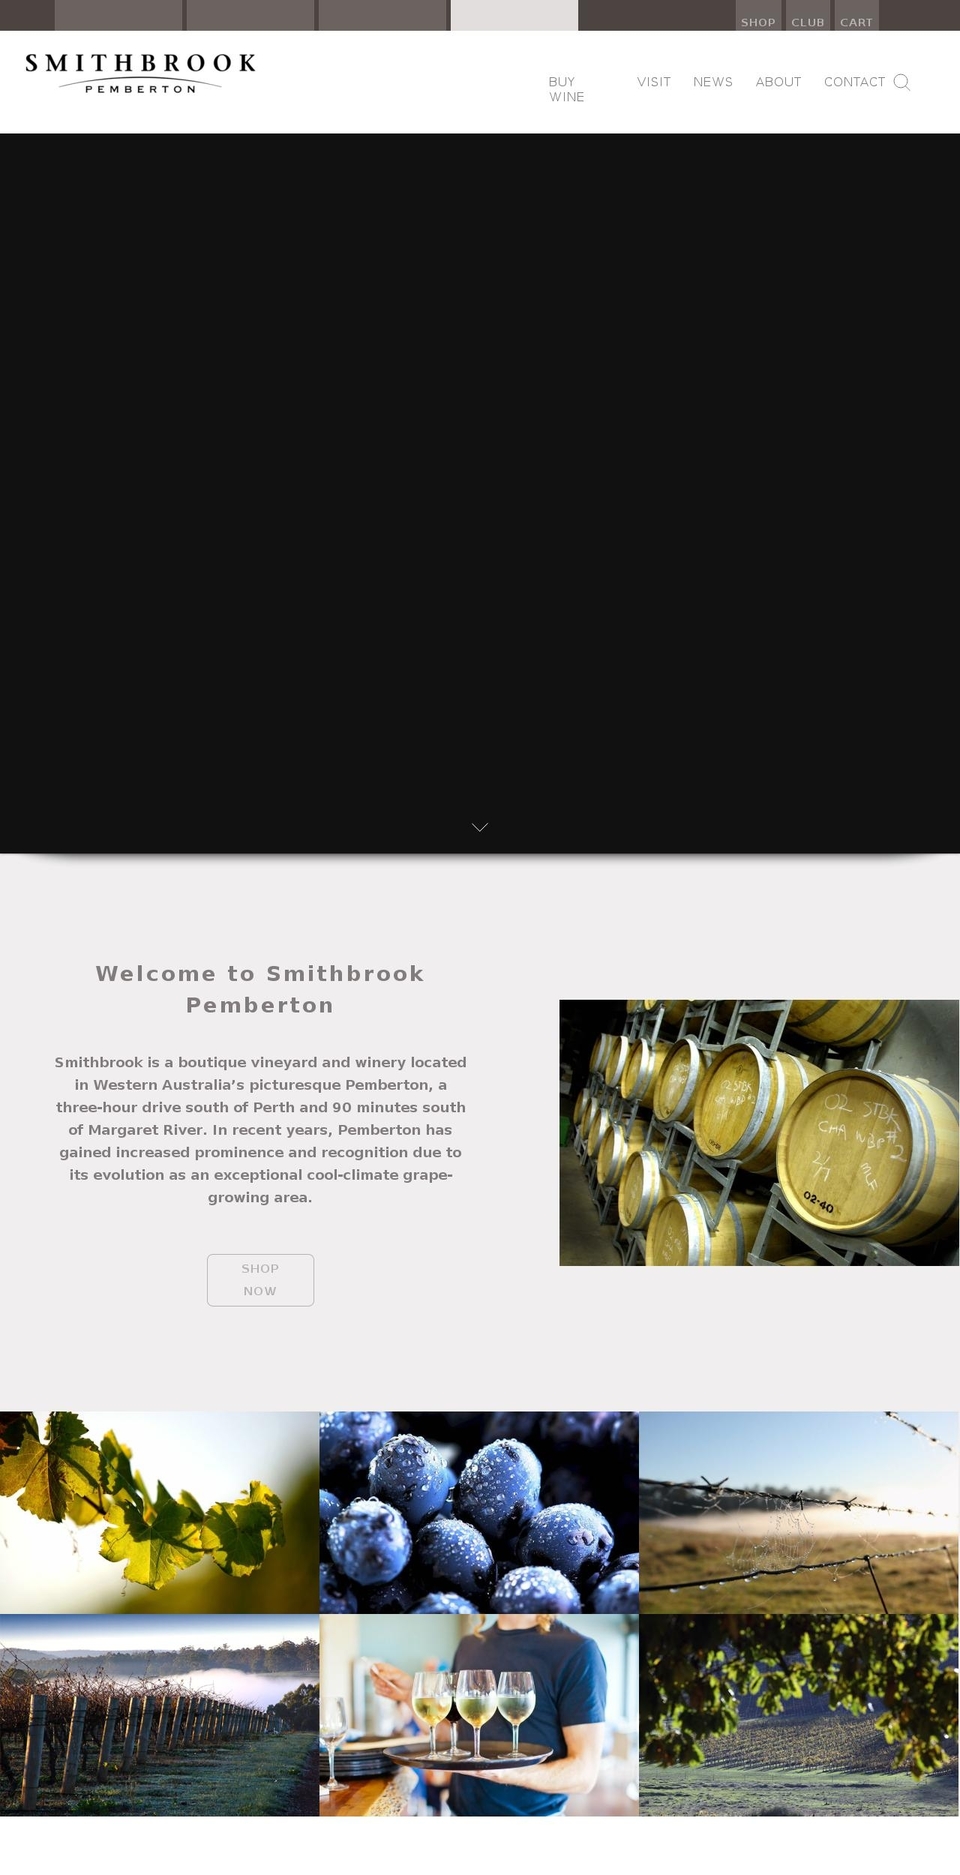 FWG by Clue - Smithbrook Shopify theme site example smithbrook.wine